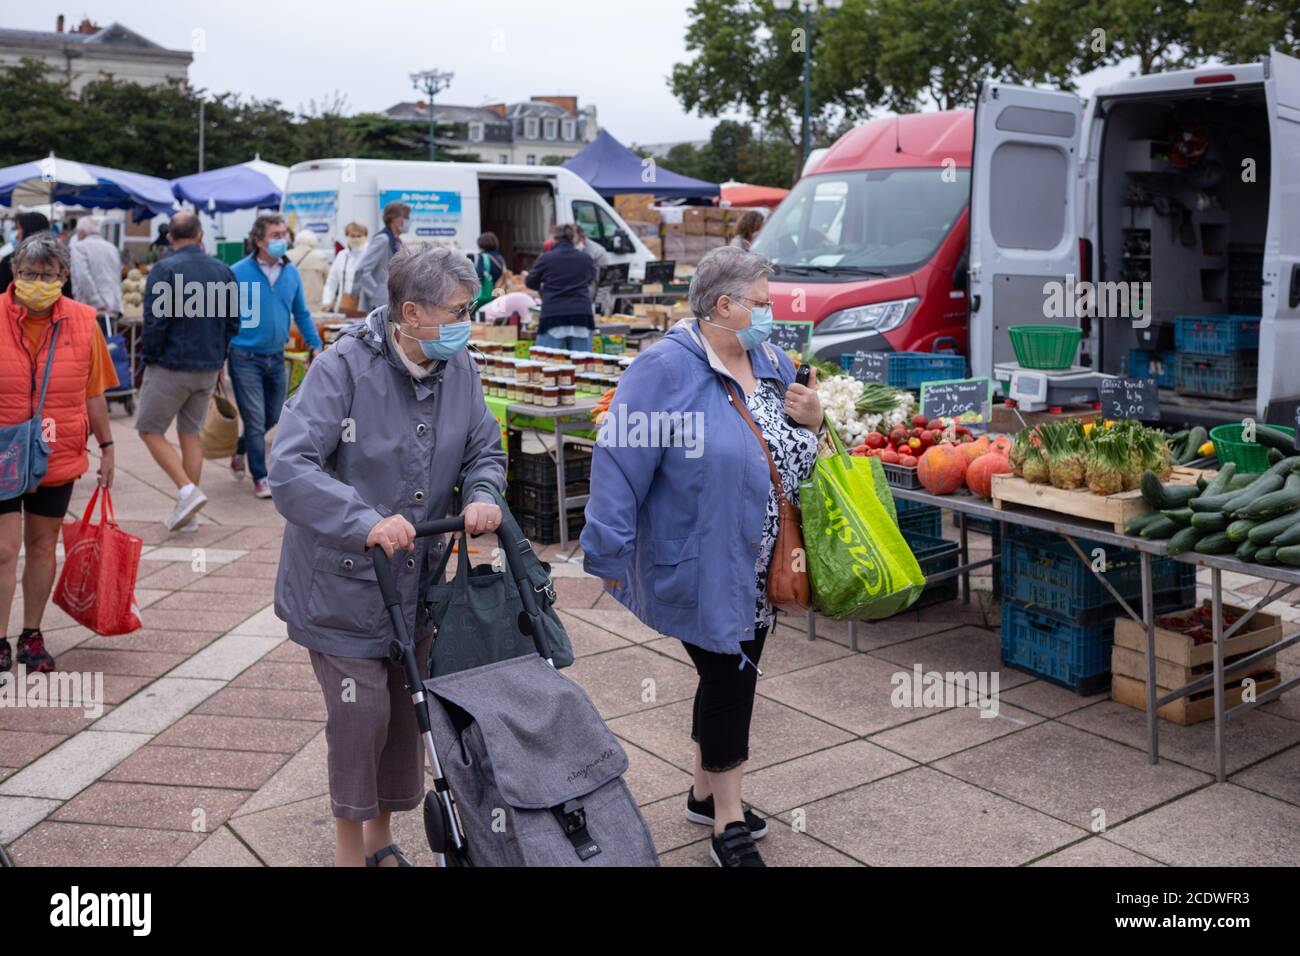 Angers, France - August 29 2020: people wearing face protective mask while shopping in the market place at France to prevent coronavirus, concept of wearing masks outdoor is mandatory in Europe, aged people Stock Photo